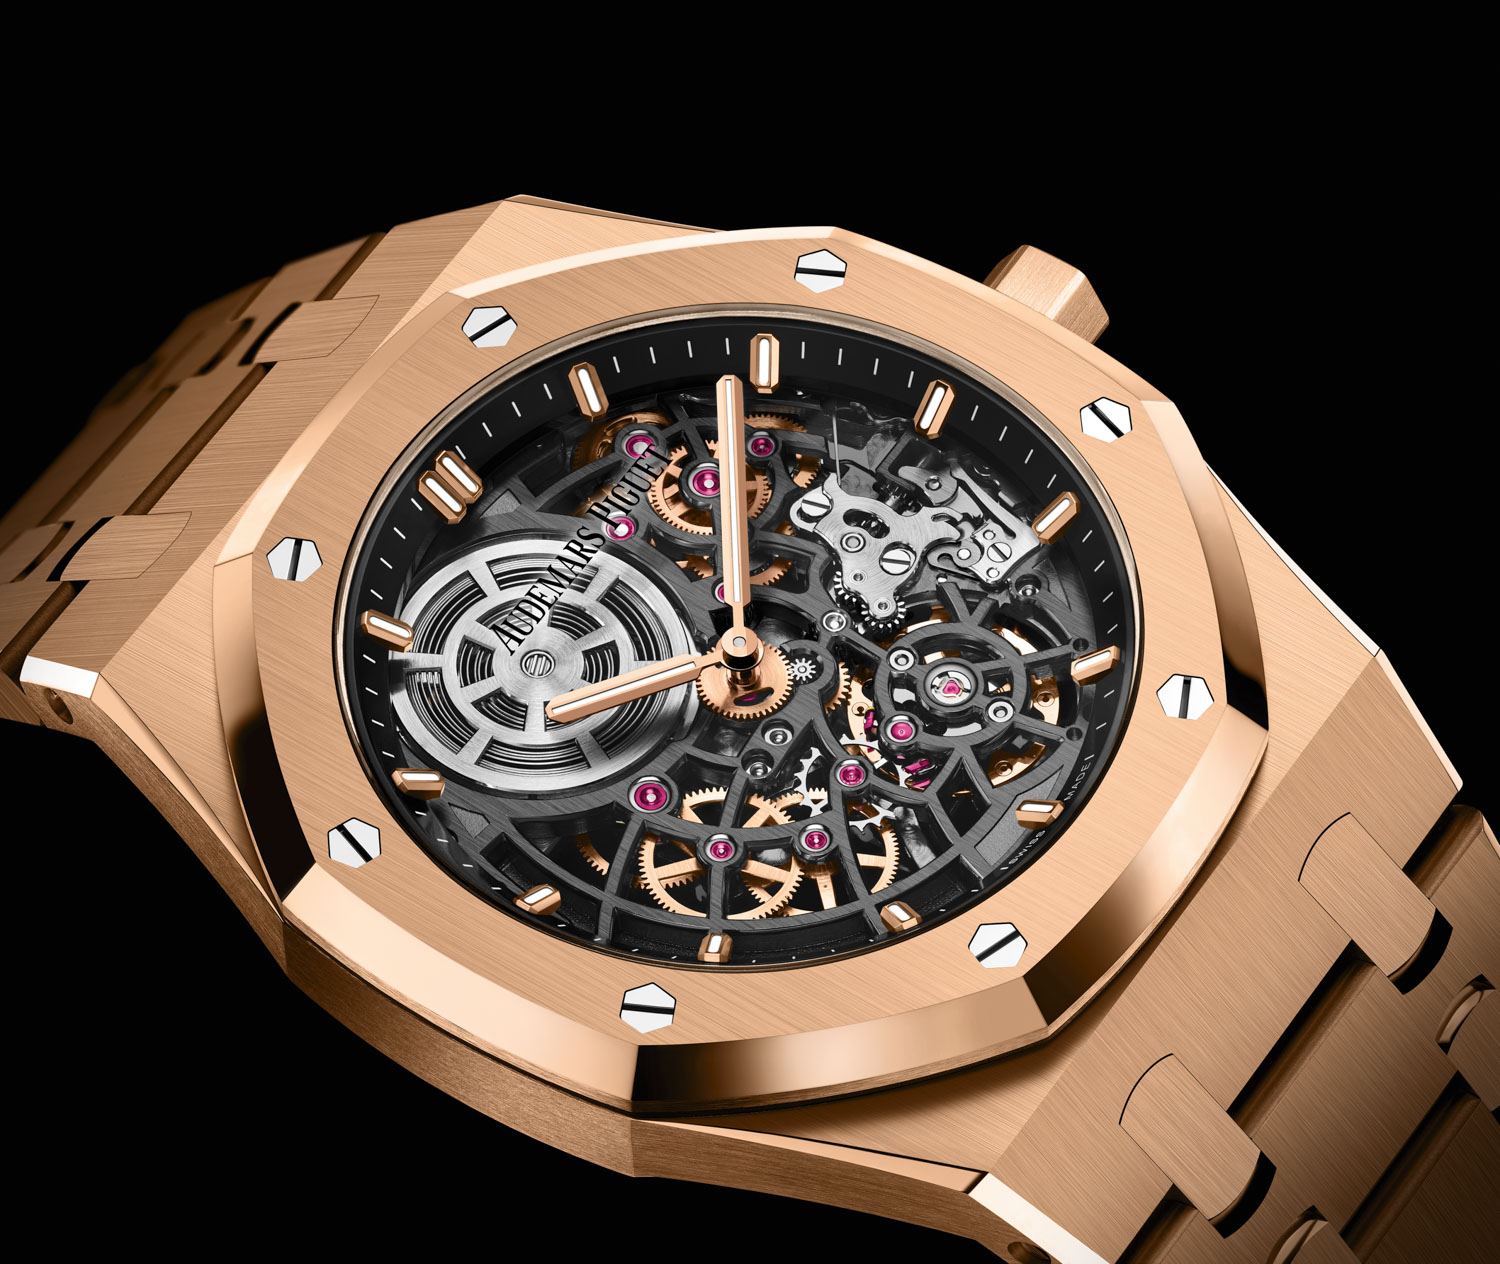 Royal Oak “Jumbo” Extra-Thin Openworked / 39mm; Ref. 16204OR.OO.1240OR.01 in 18-carat pink gold with slate grey openworked movement, pink gold applied hour-markers and Royal Oak hands with luminescent coating, black inner bezel